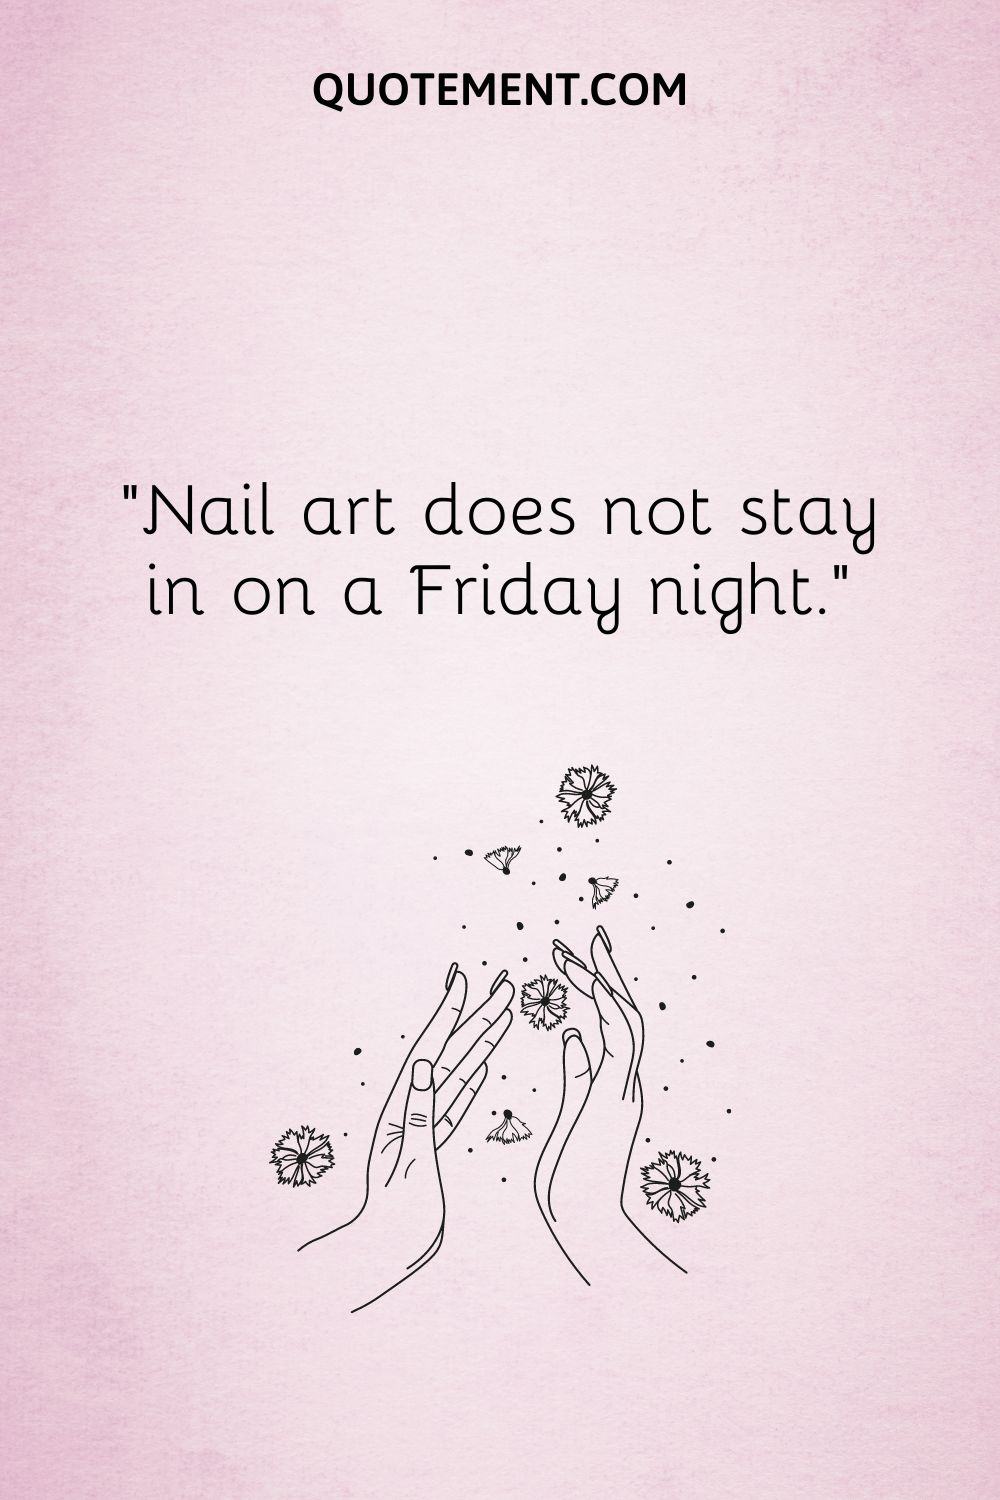 Nail art does not stay in on a Friday night